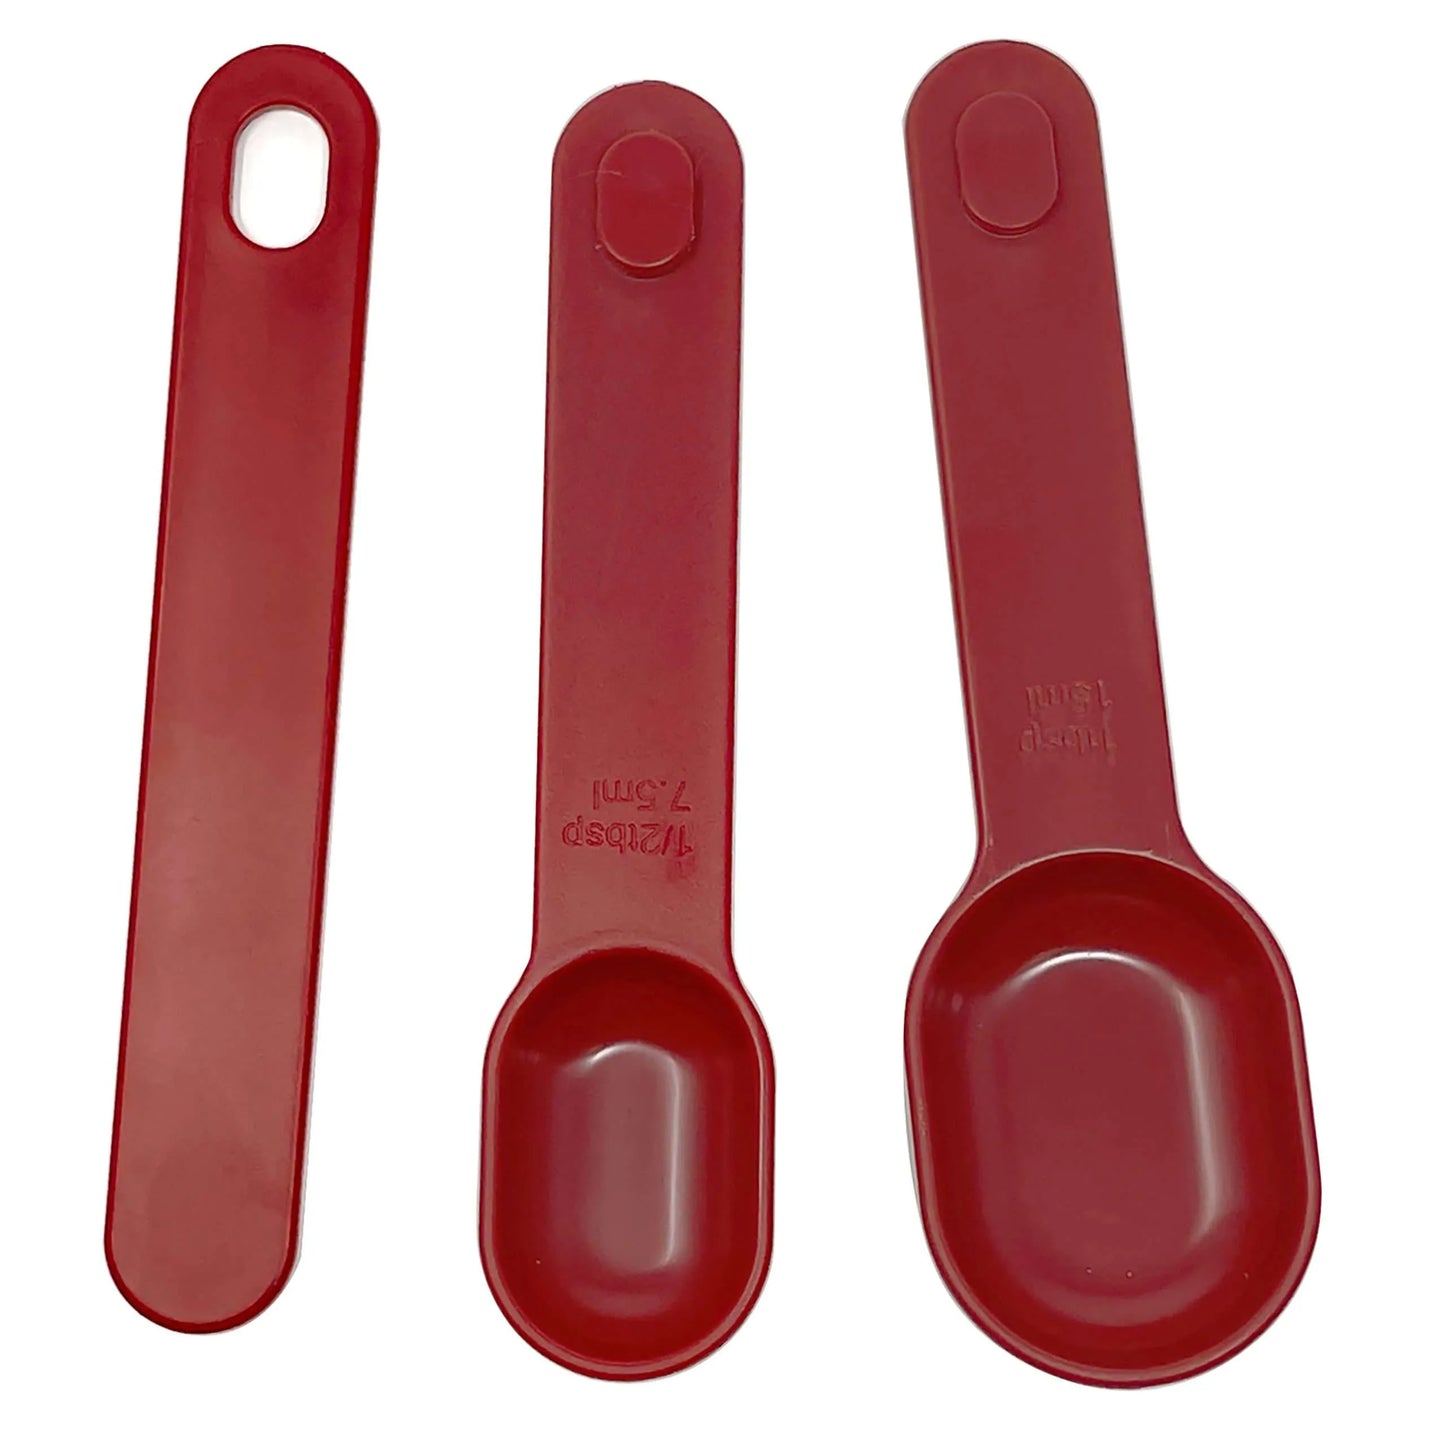 Nested Measuring Cups